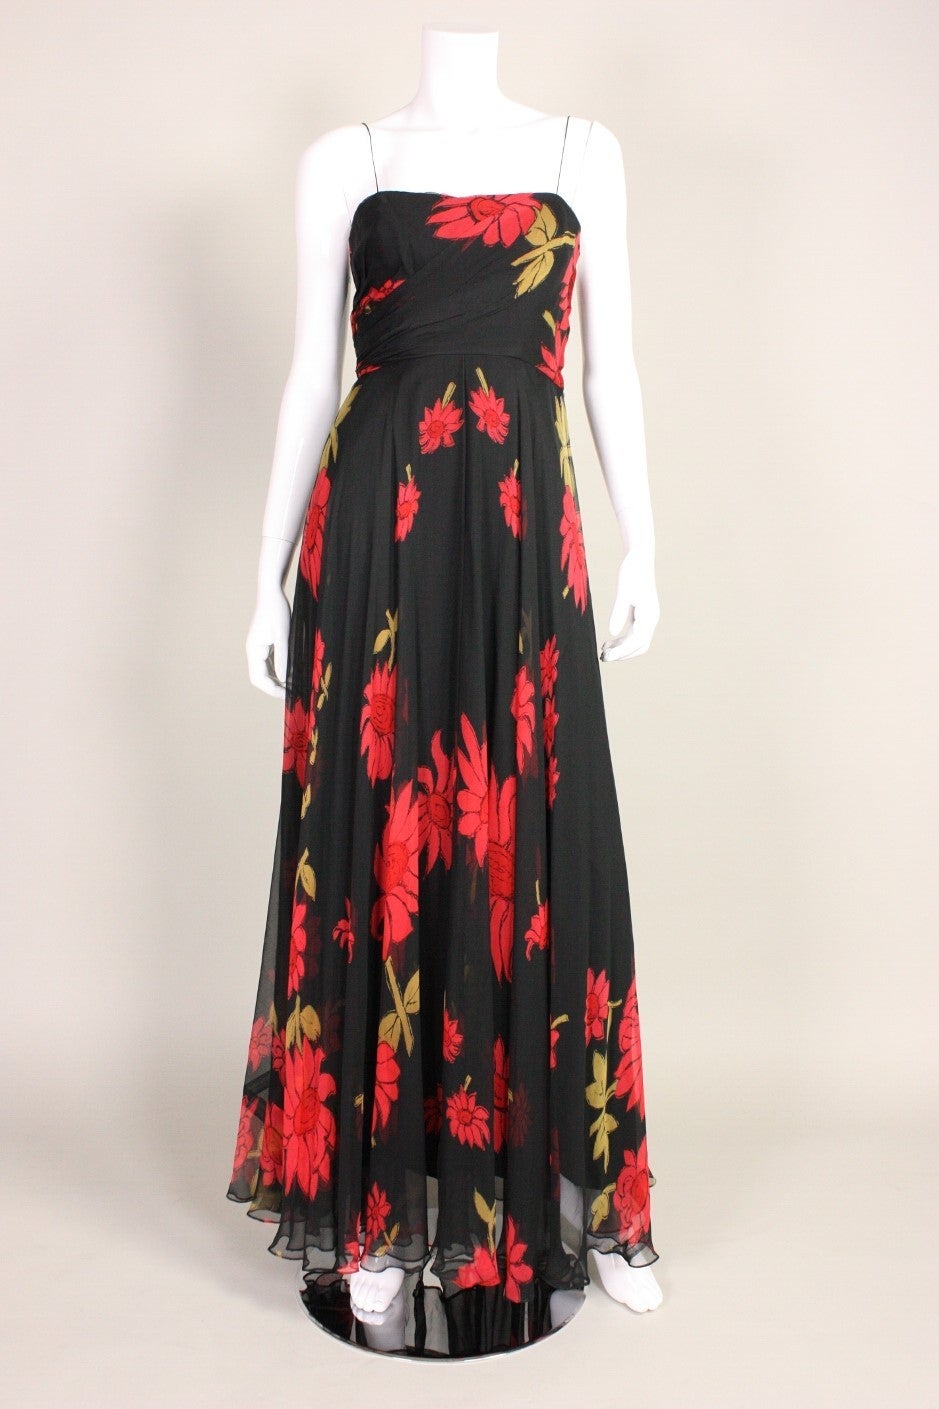 Mid-1950's gown with a 1930's feel.  Black silk chiffon with a large floral print in red and green.  Fitted bodice gathers diagonally at side waist.  Ankle length, bias cut skirt.  Built-in boned waist corset.  Spaghetti straps.  Side metal zip. 